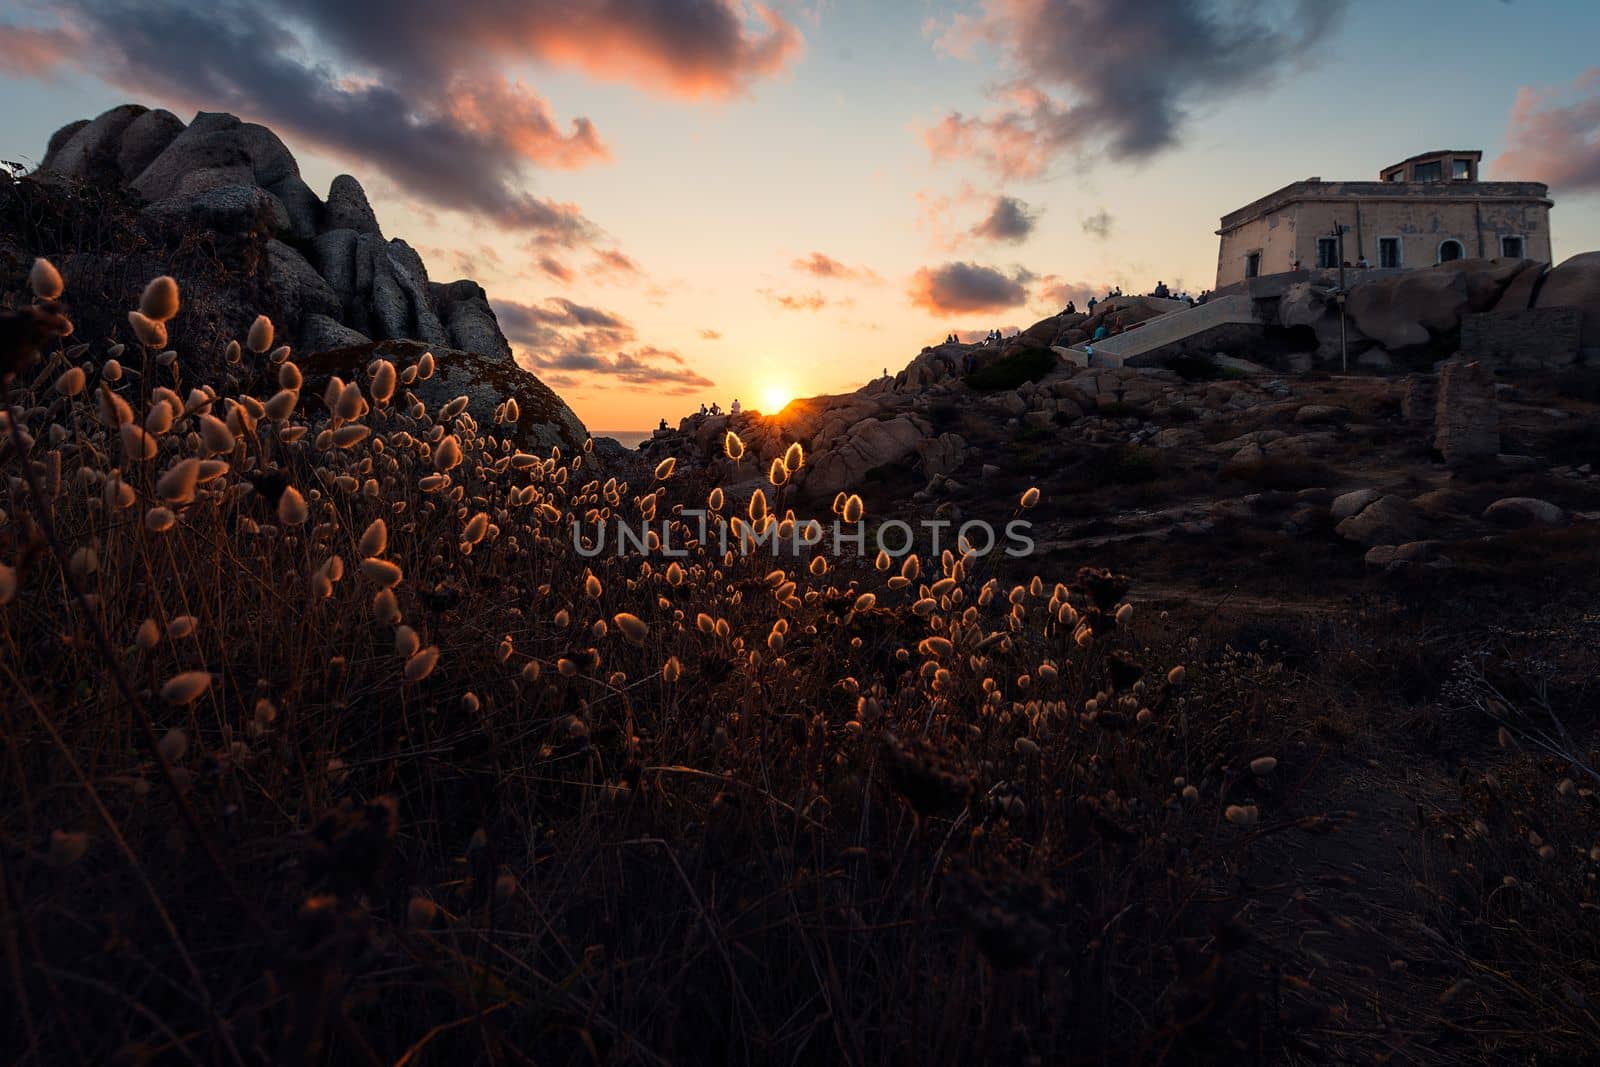 The thickets shine illuminated by the sunlight at sunset in a rocky landscape, in the blue and orange sky there are some clouds, relaxing feeling of peace and tranquility, Capo Testa, Sardinia, Italy